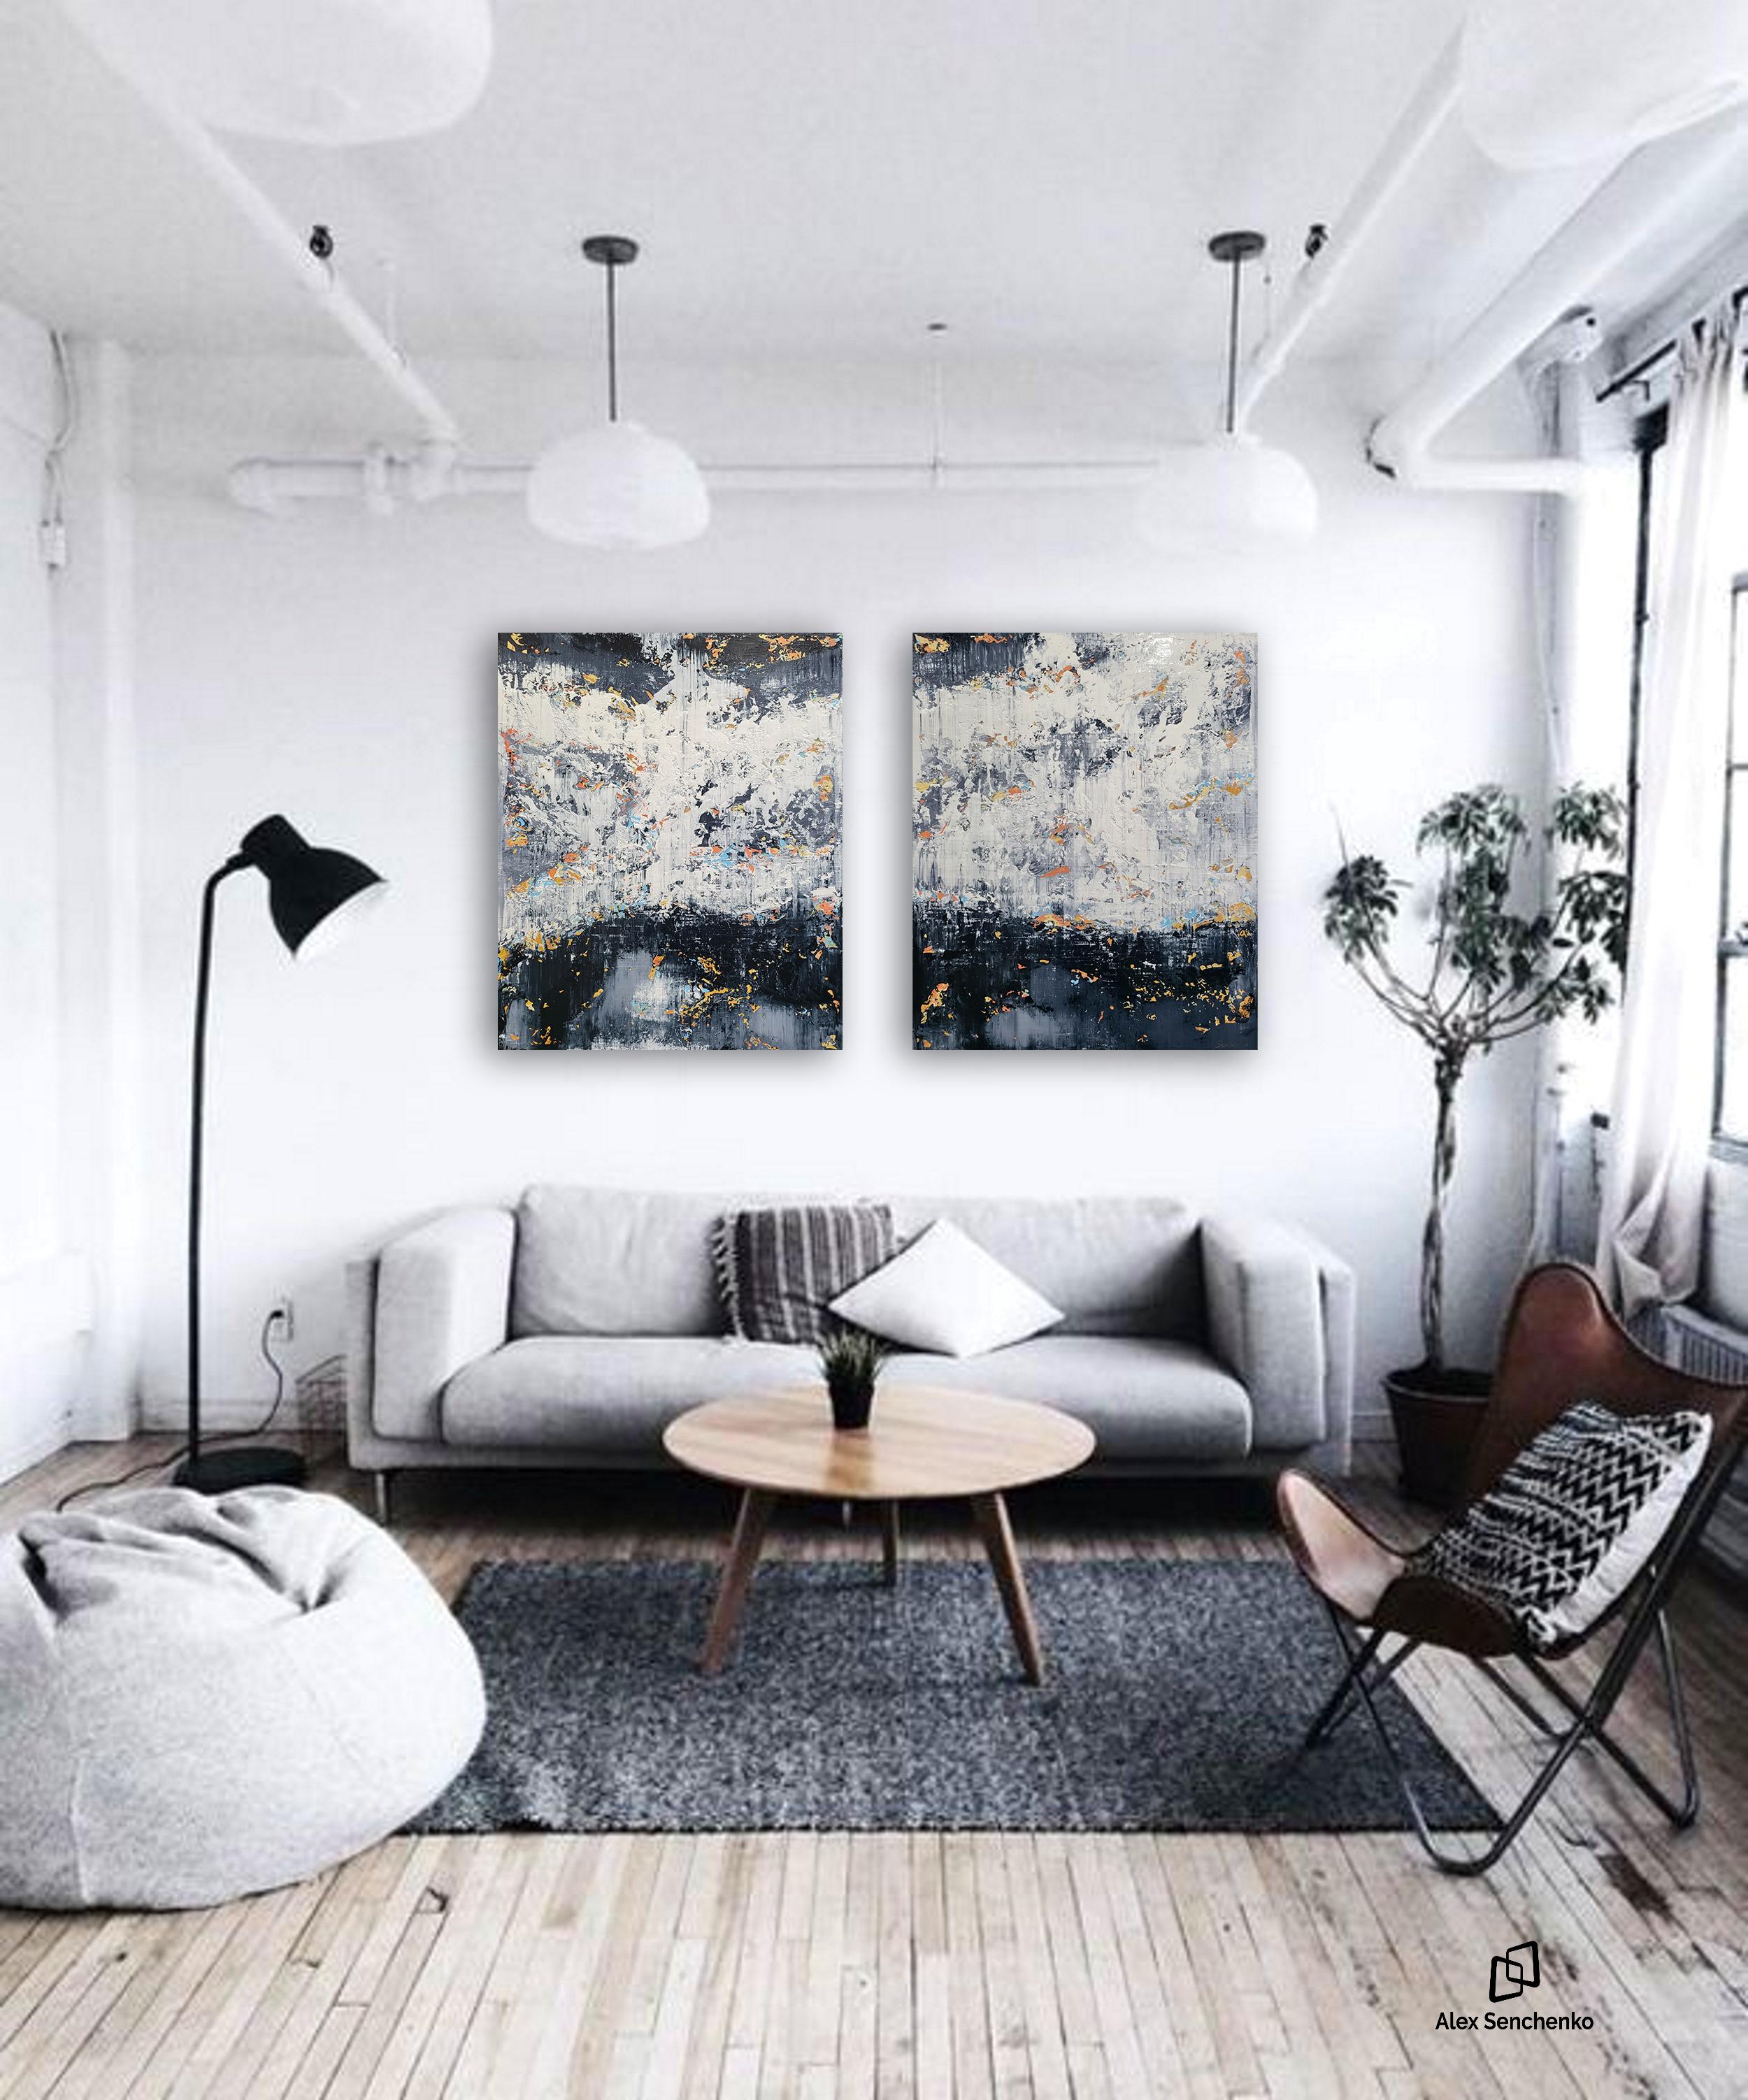 This original artwork by Alex Senchenko is an abstract, contemporary acrylic on canvas piece. Perfect for a room that needs a burst of color.
Comes with a certificate of authenticity, signed and dated by the